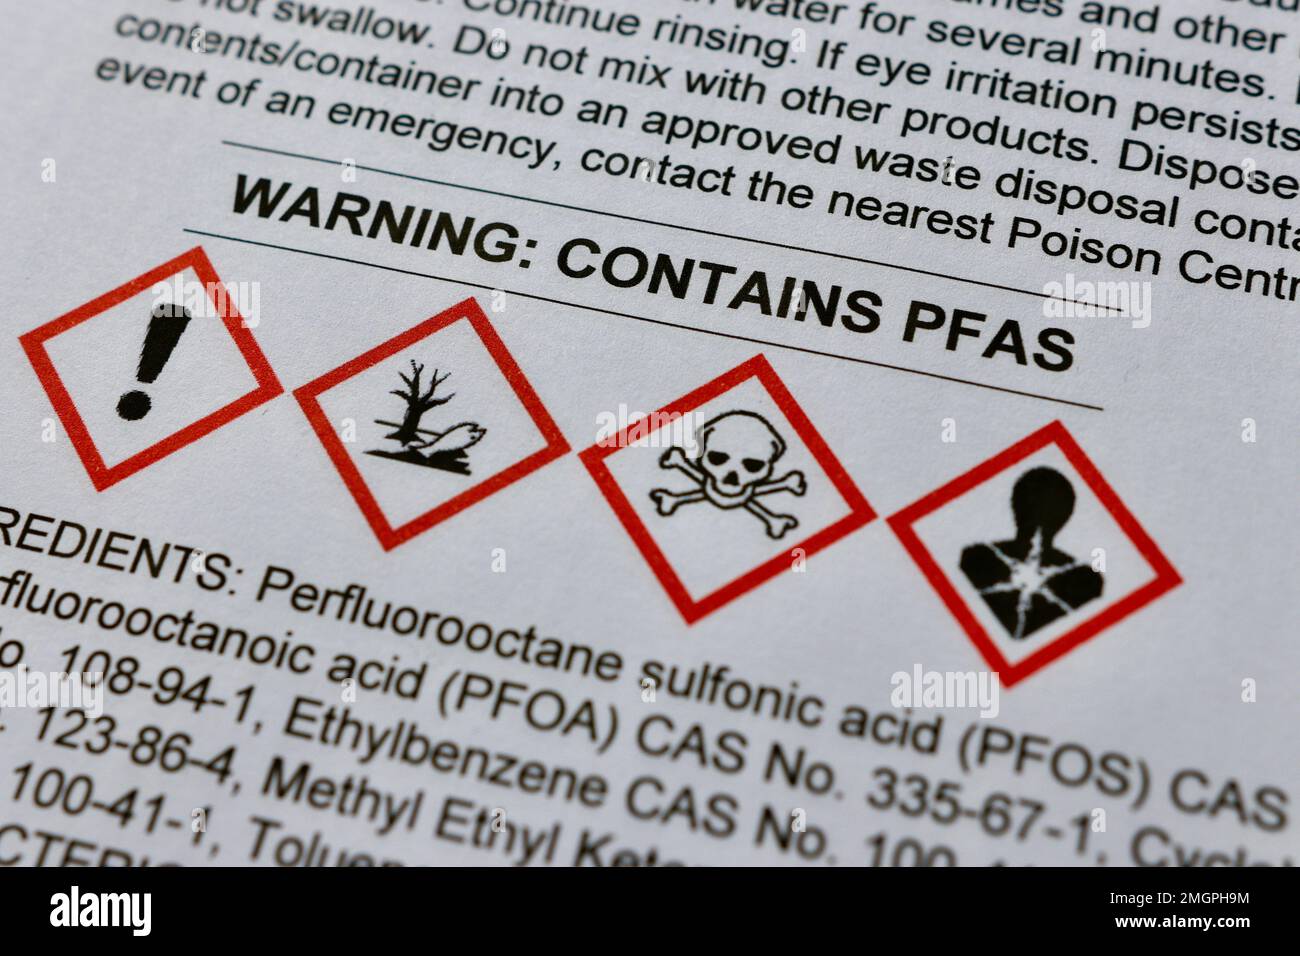 https://c8.alamy.com/comp/2MGPH9M/warning-on-a-safety-data-sheet-showing-that-the-product-contains-pfas-substances-or-forever-chemicals-standard-chemical-hazard-pictograms-are-shown-2MGPH9M.jpg